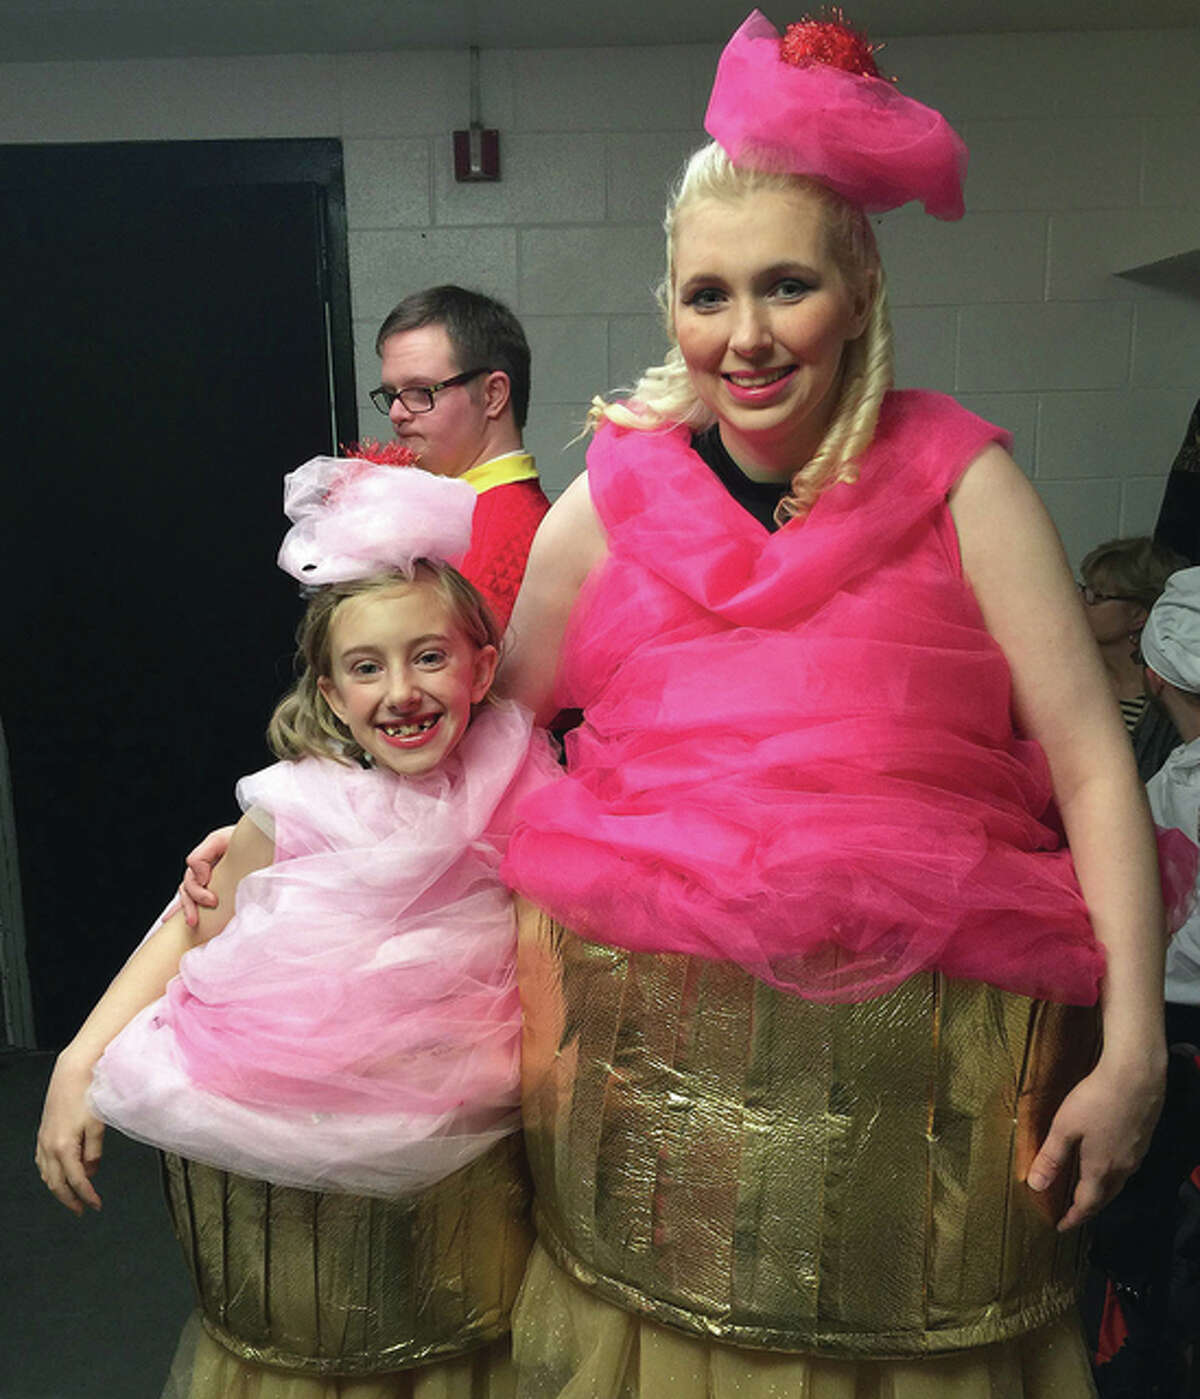 Erin Hart (right) and her mentor, Isabelle Stanton, dress as enchanted cupcakes during a practice for the Chicagoland Ice Theatre Inspirations team performance of “Beauty and the Beast.”